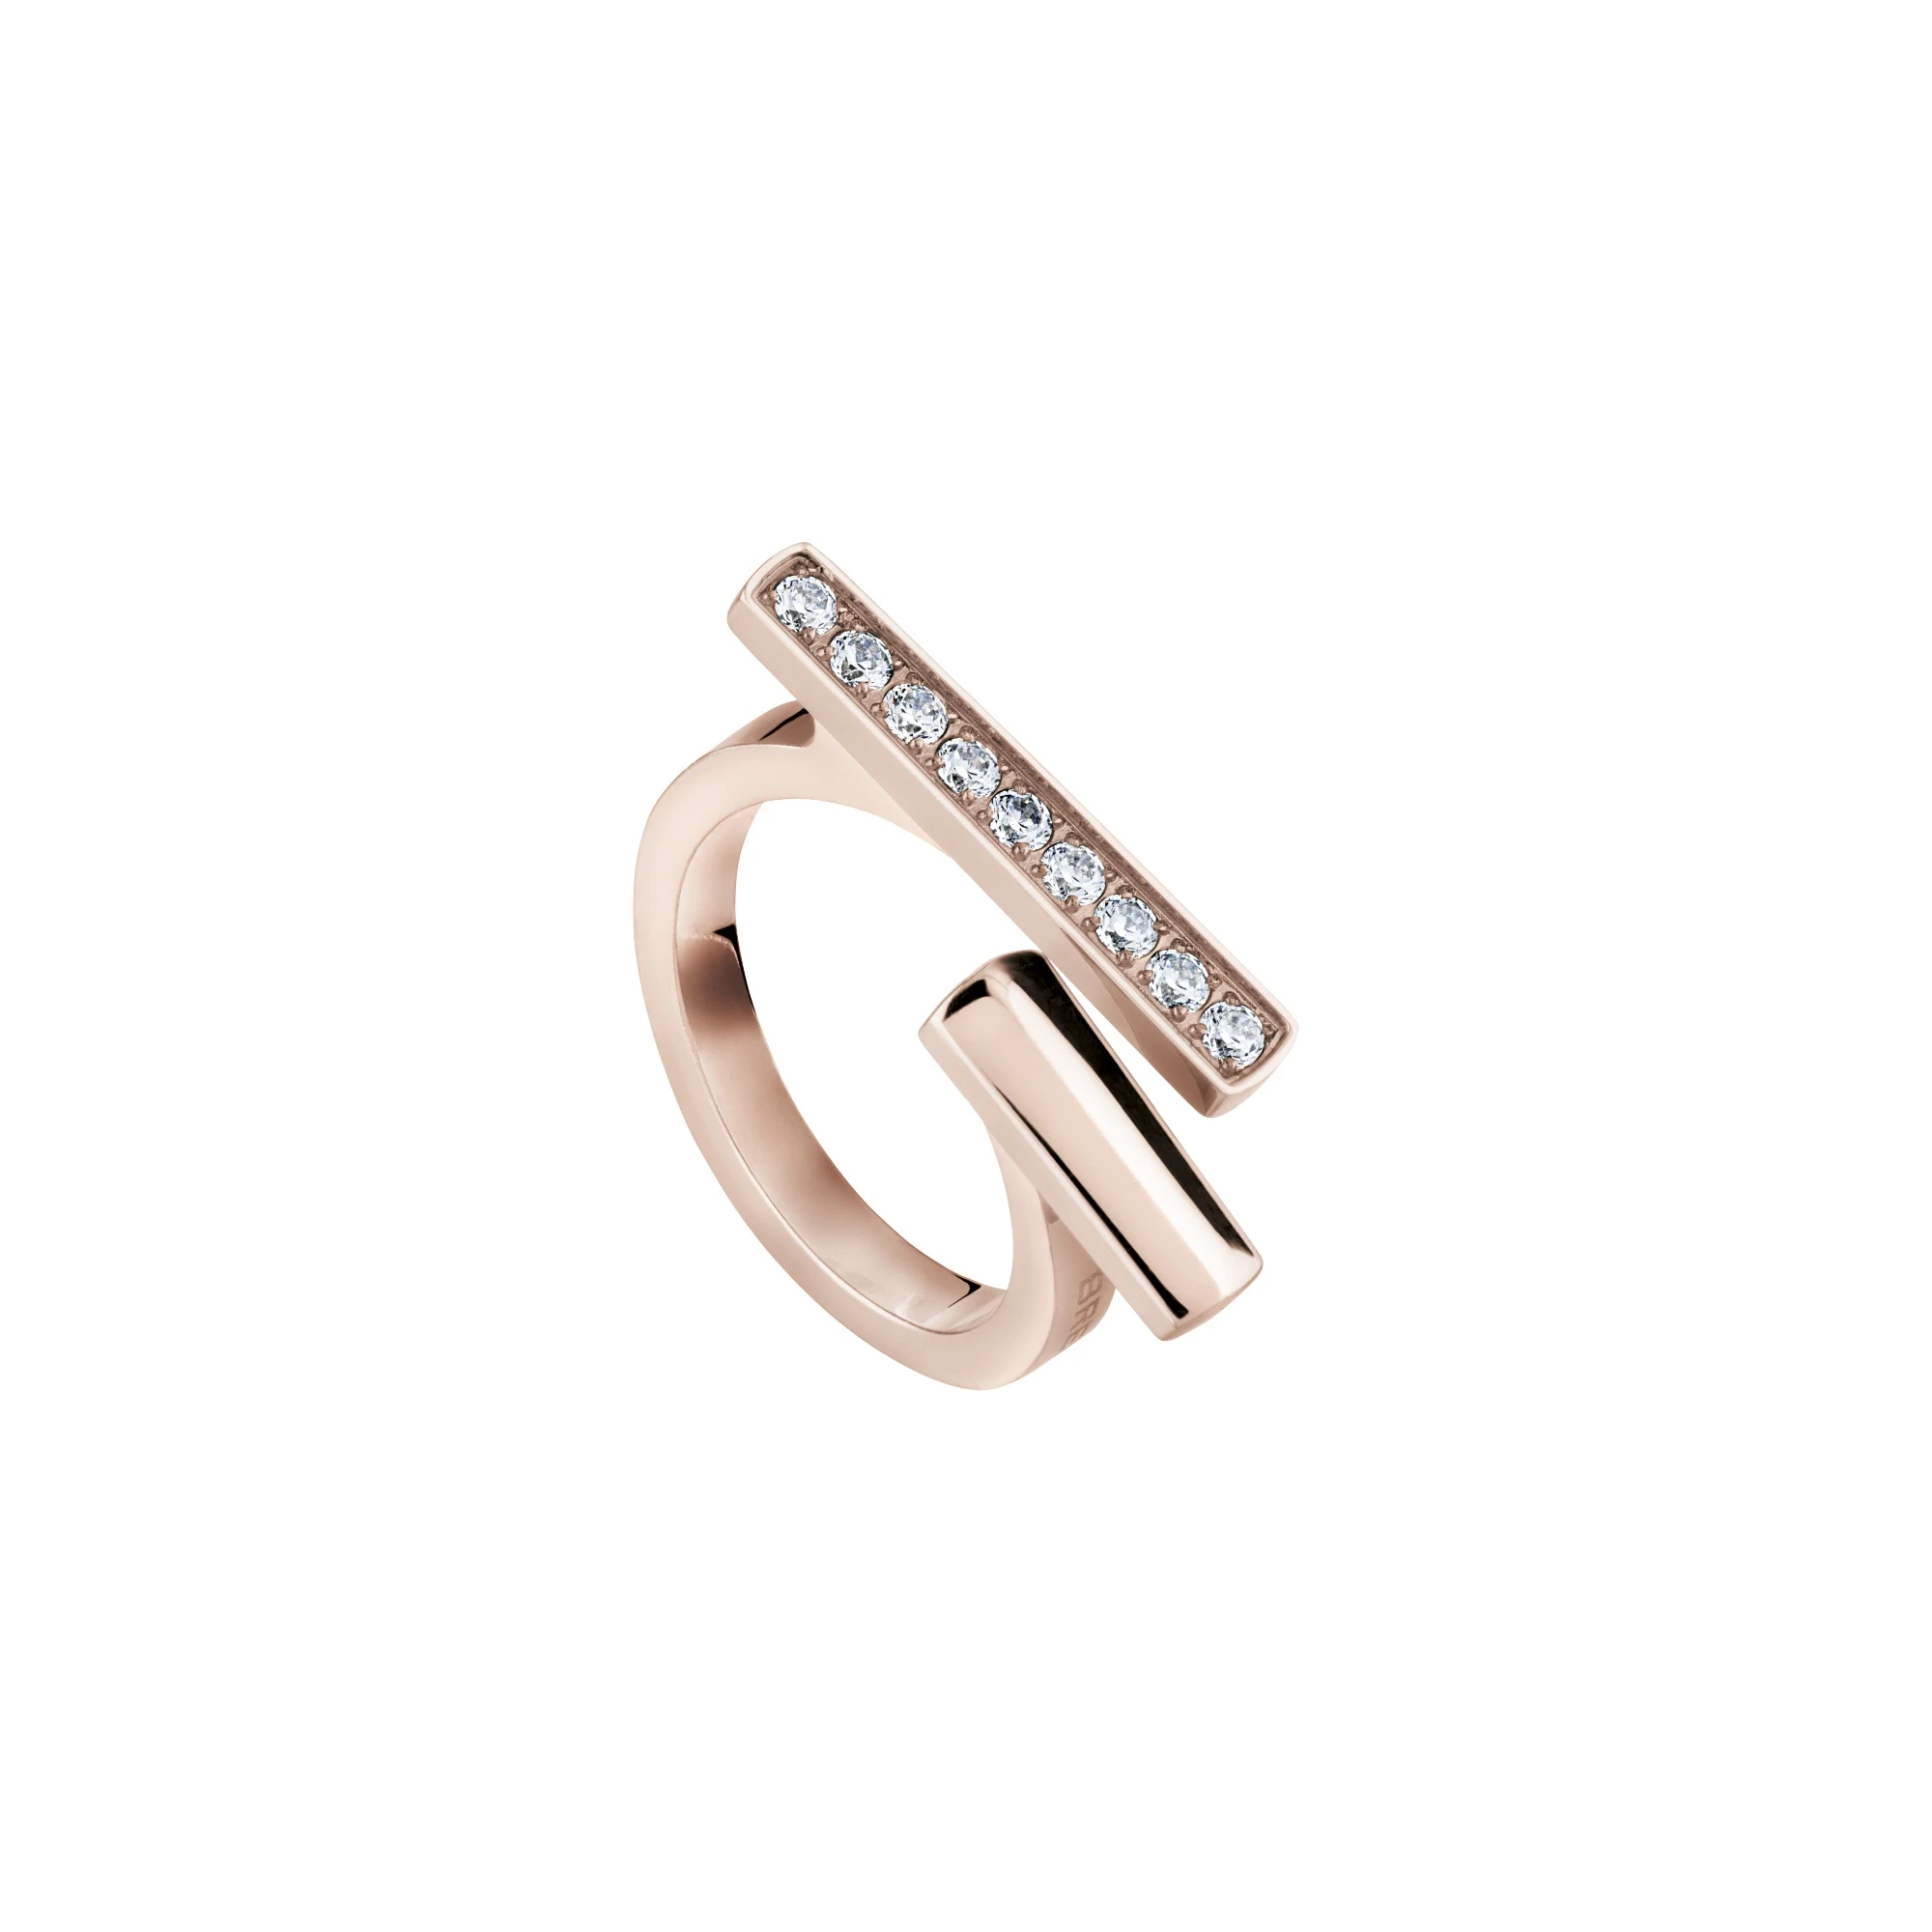 STICKS - IP ROSE POLISHED STAINLESS STEEL RING WITH CRYSTALS - 1 - TJ2555_ | Breil